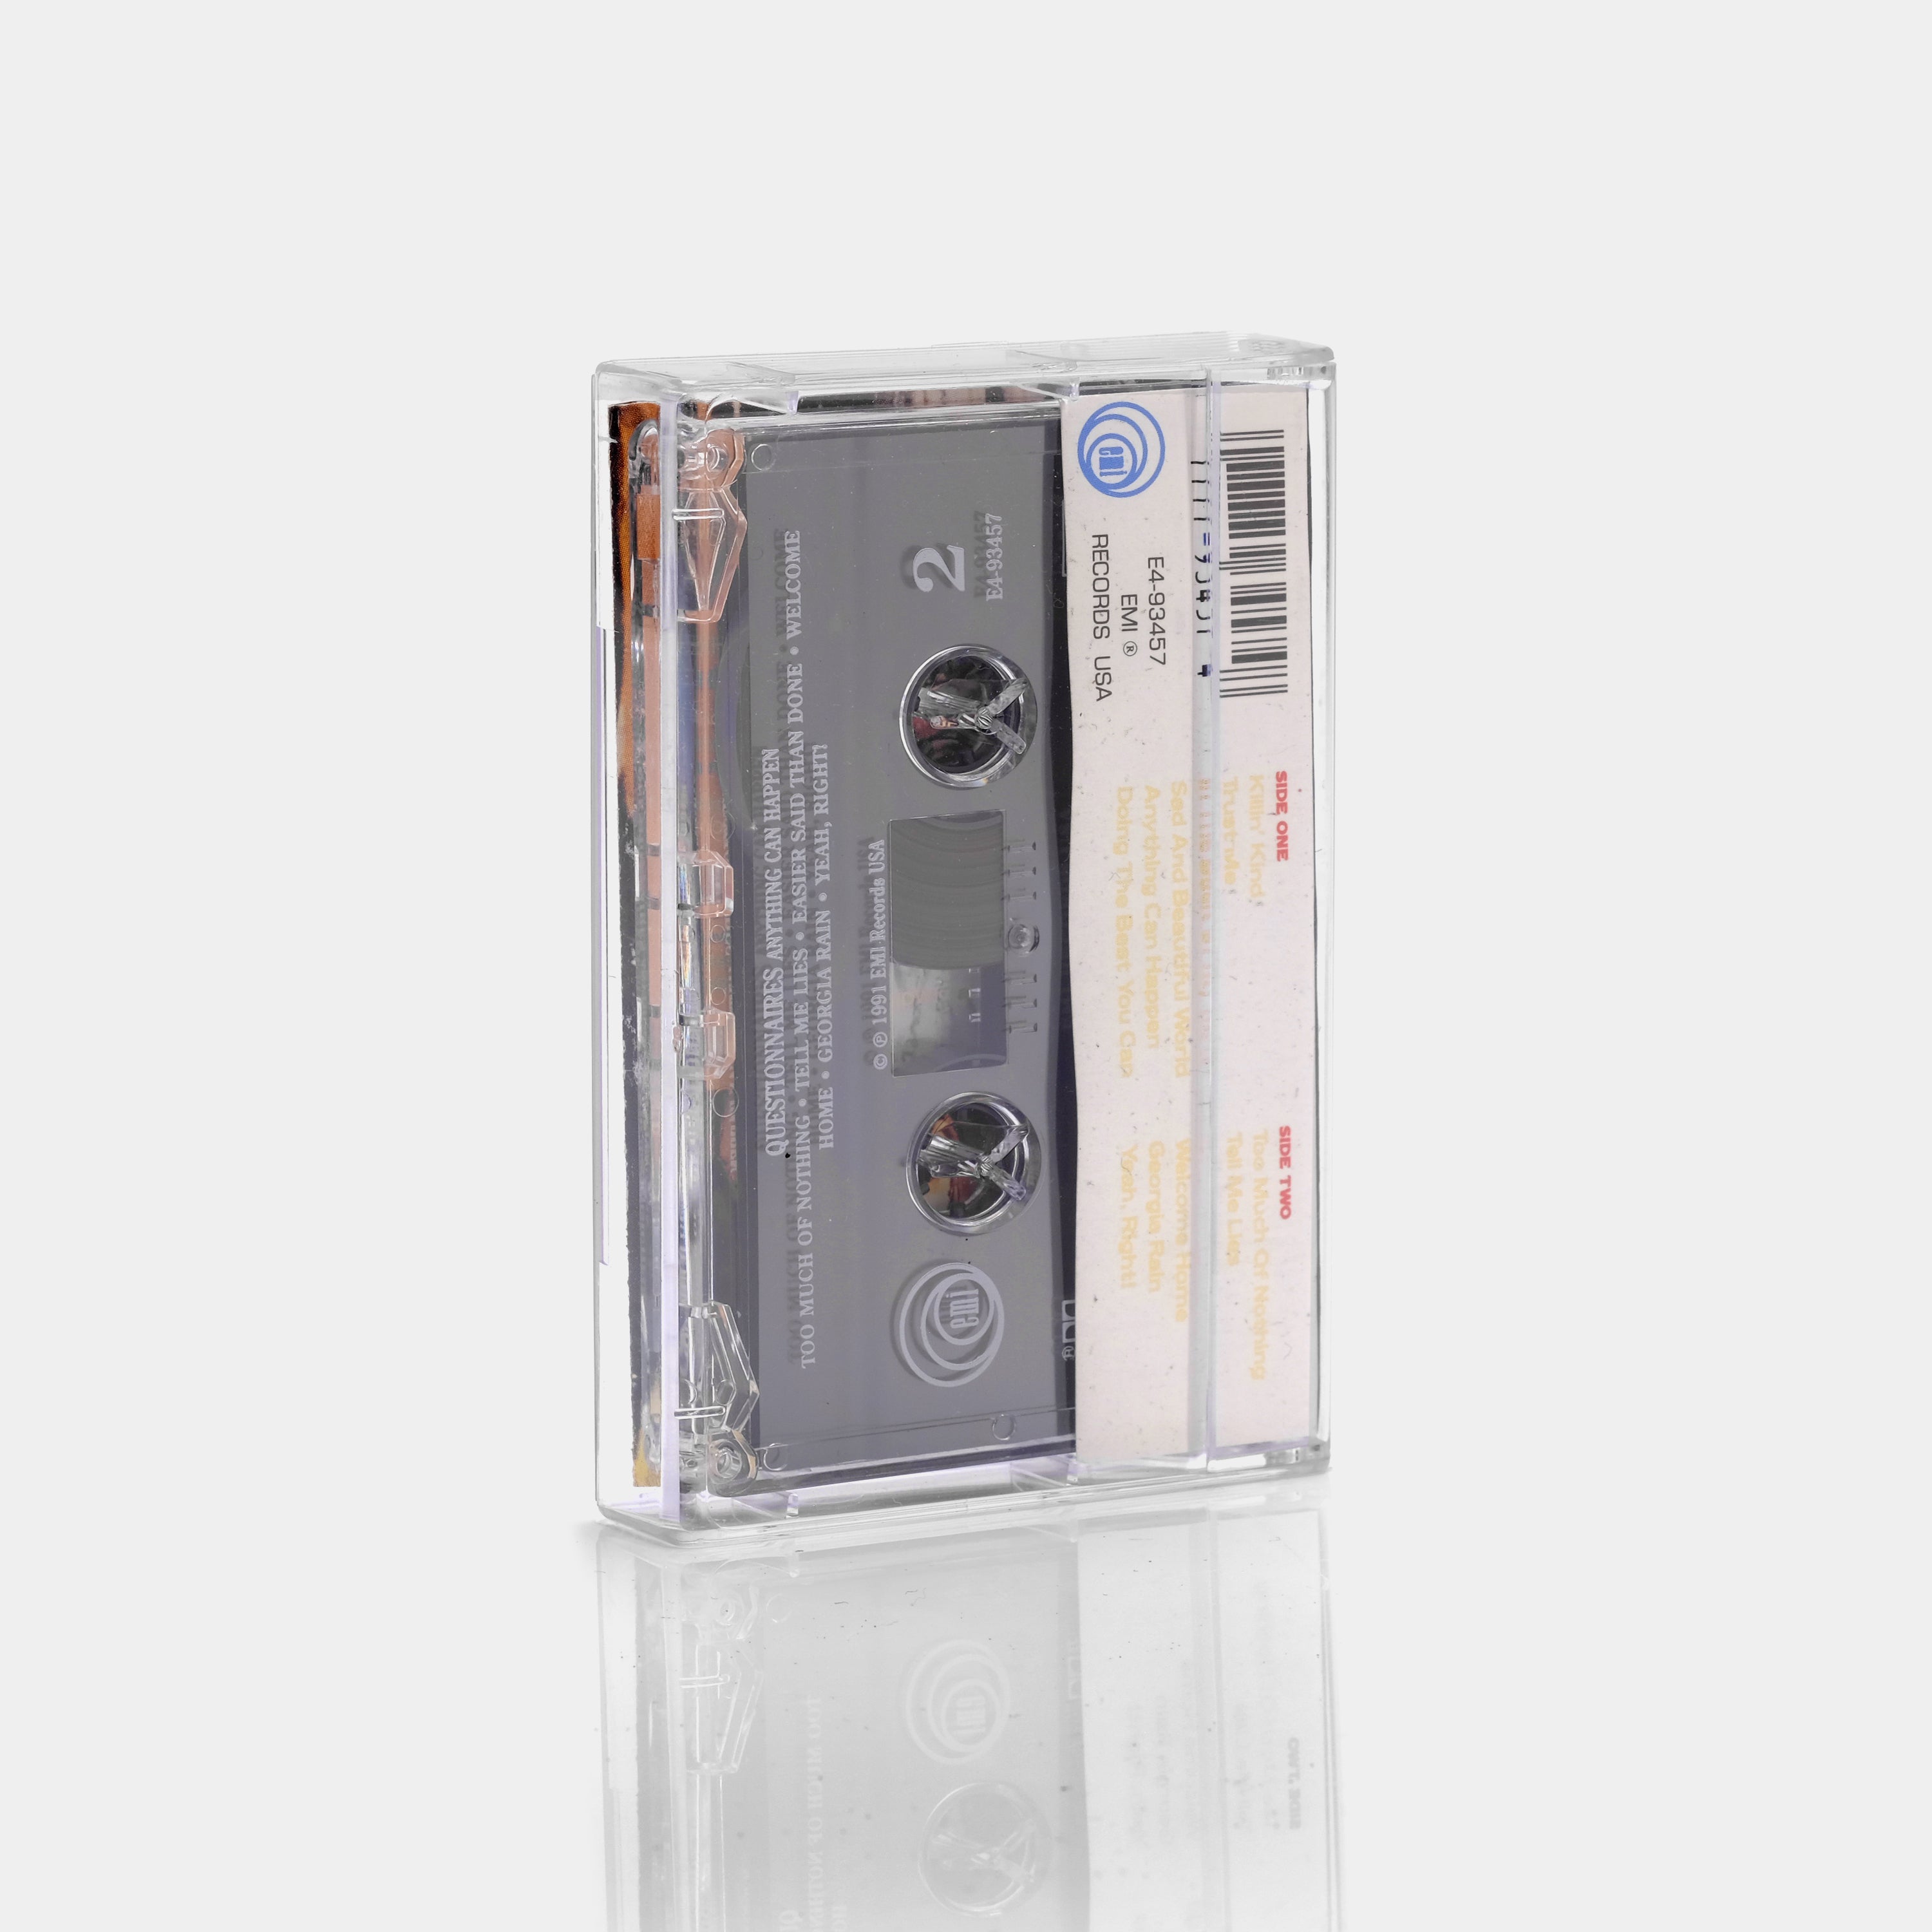 Questionnaires - Anything Can Happen Cassette Tape